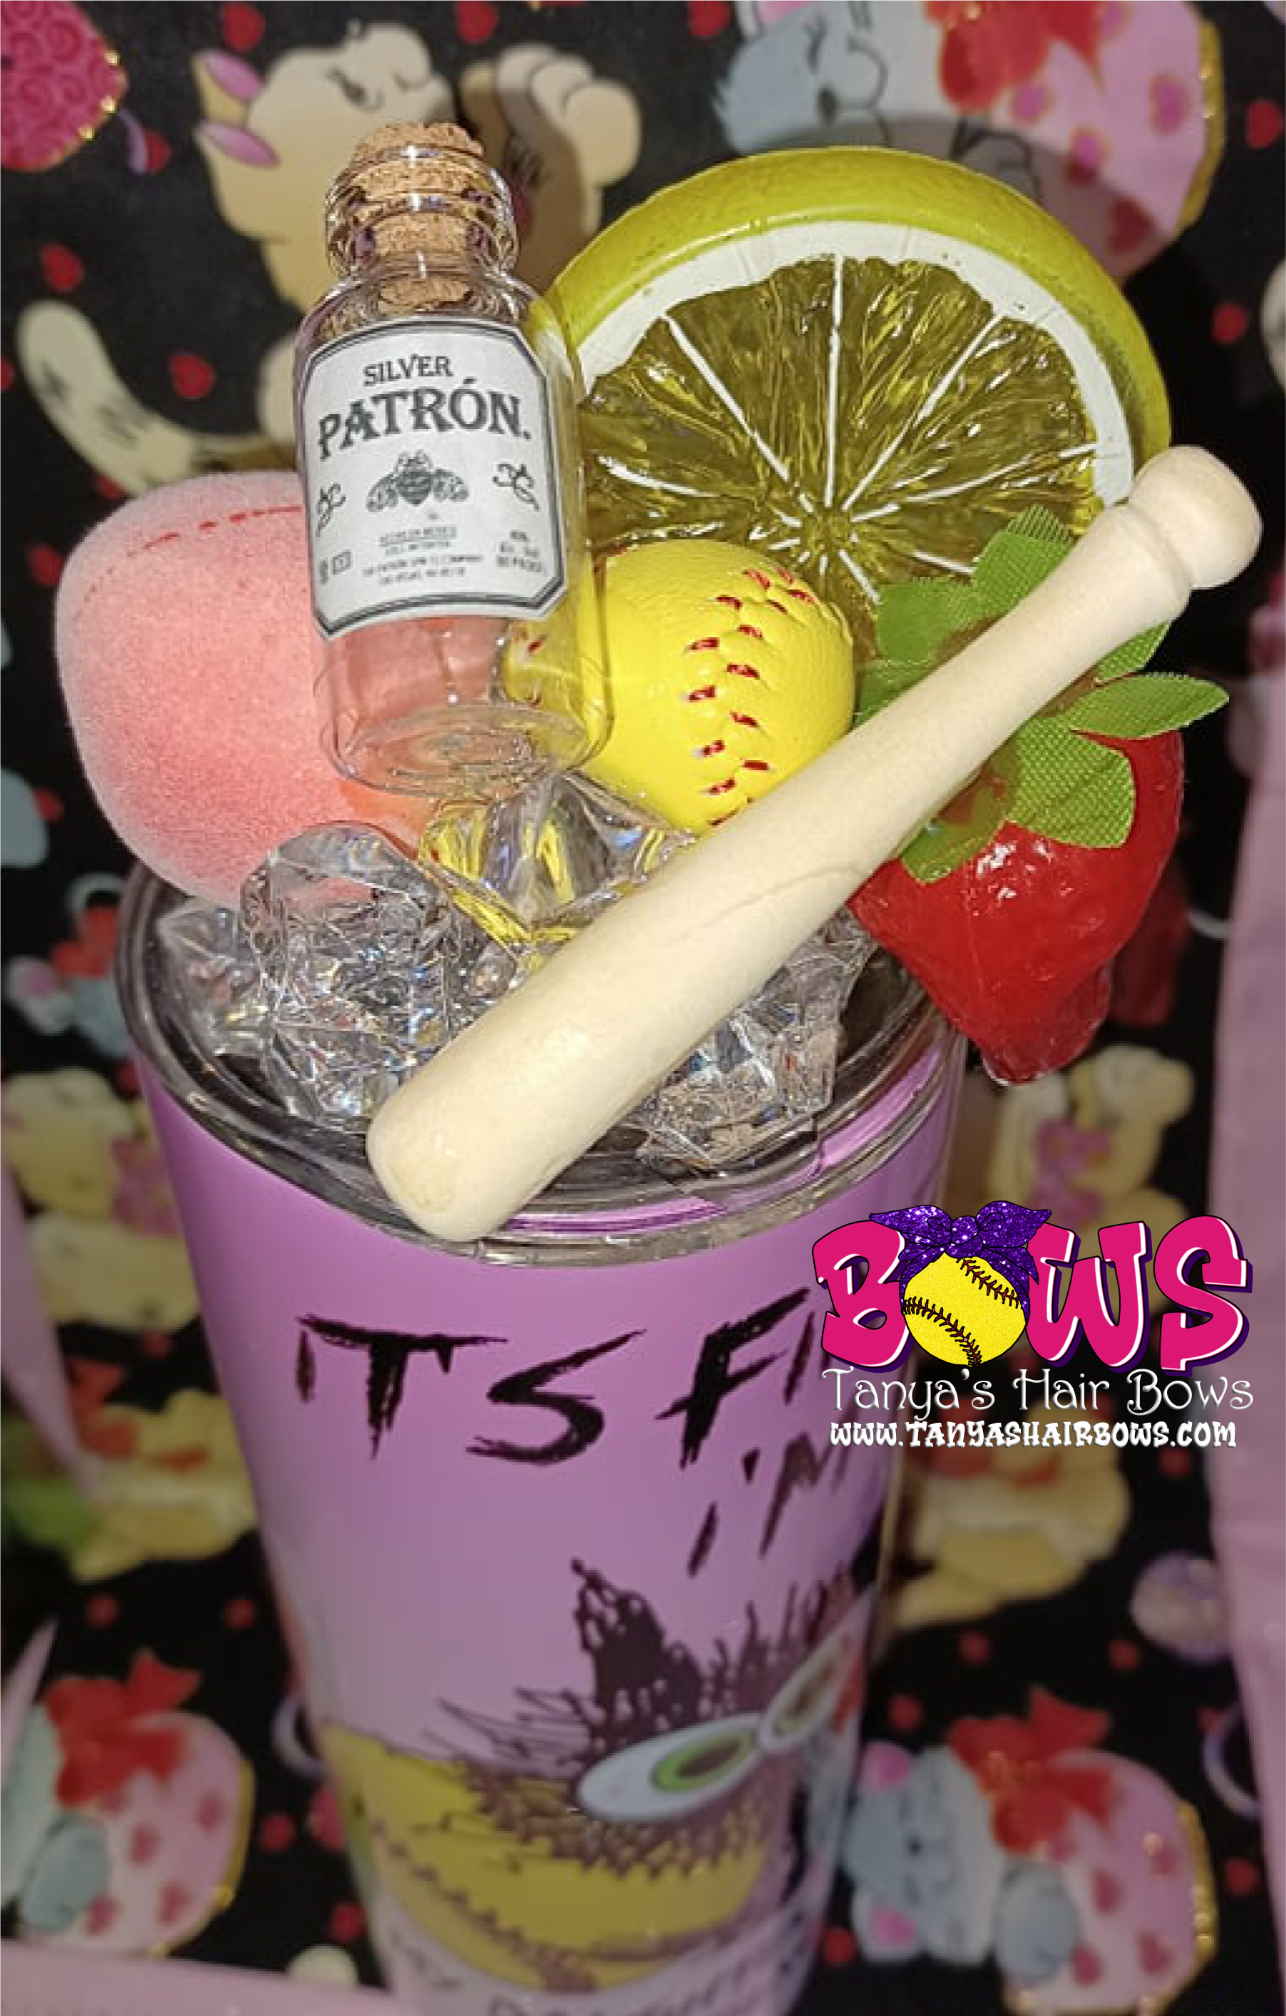 Softball Topper with faux fruit an bottle of Patron